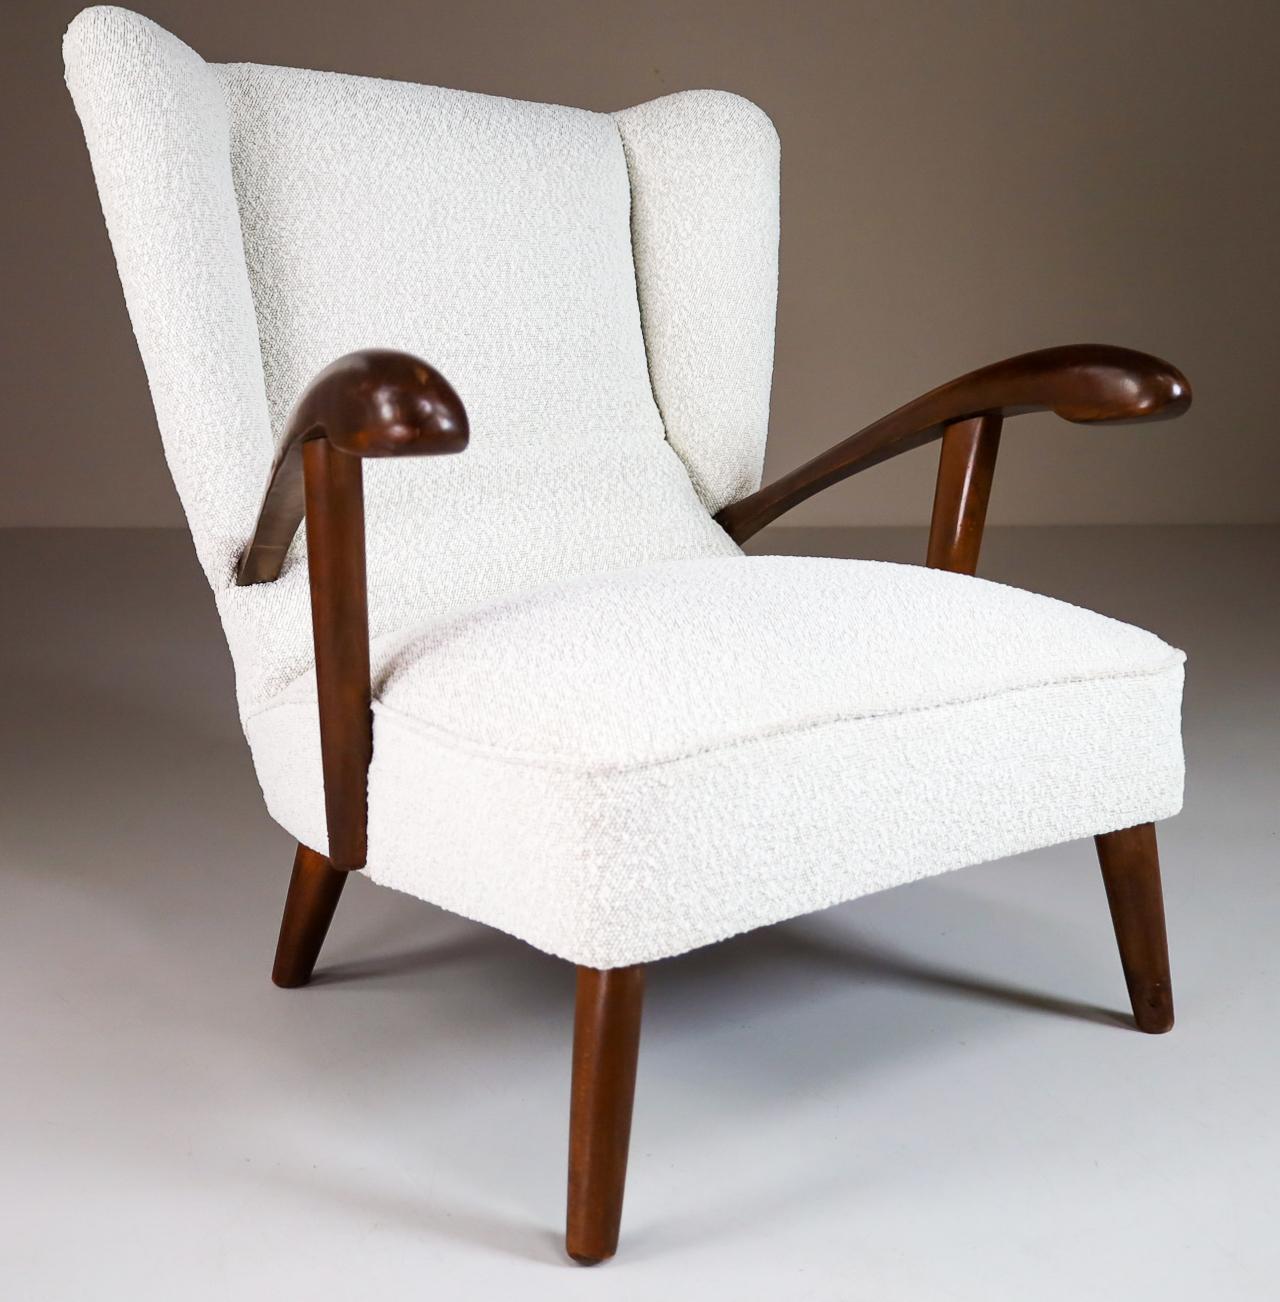 Sculptural wing chair in solid walnut and Re-upholstered bouclé wool fabric, Italy 1950s. The grain of the wood is nicely visible, especially on the elegant sculpted armrests. This armchair - lounge chair would make an eye-catching addition to any